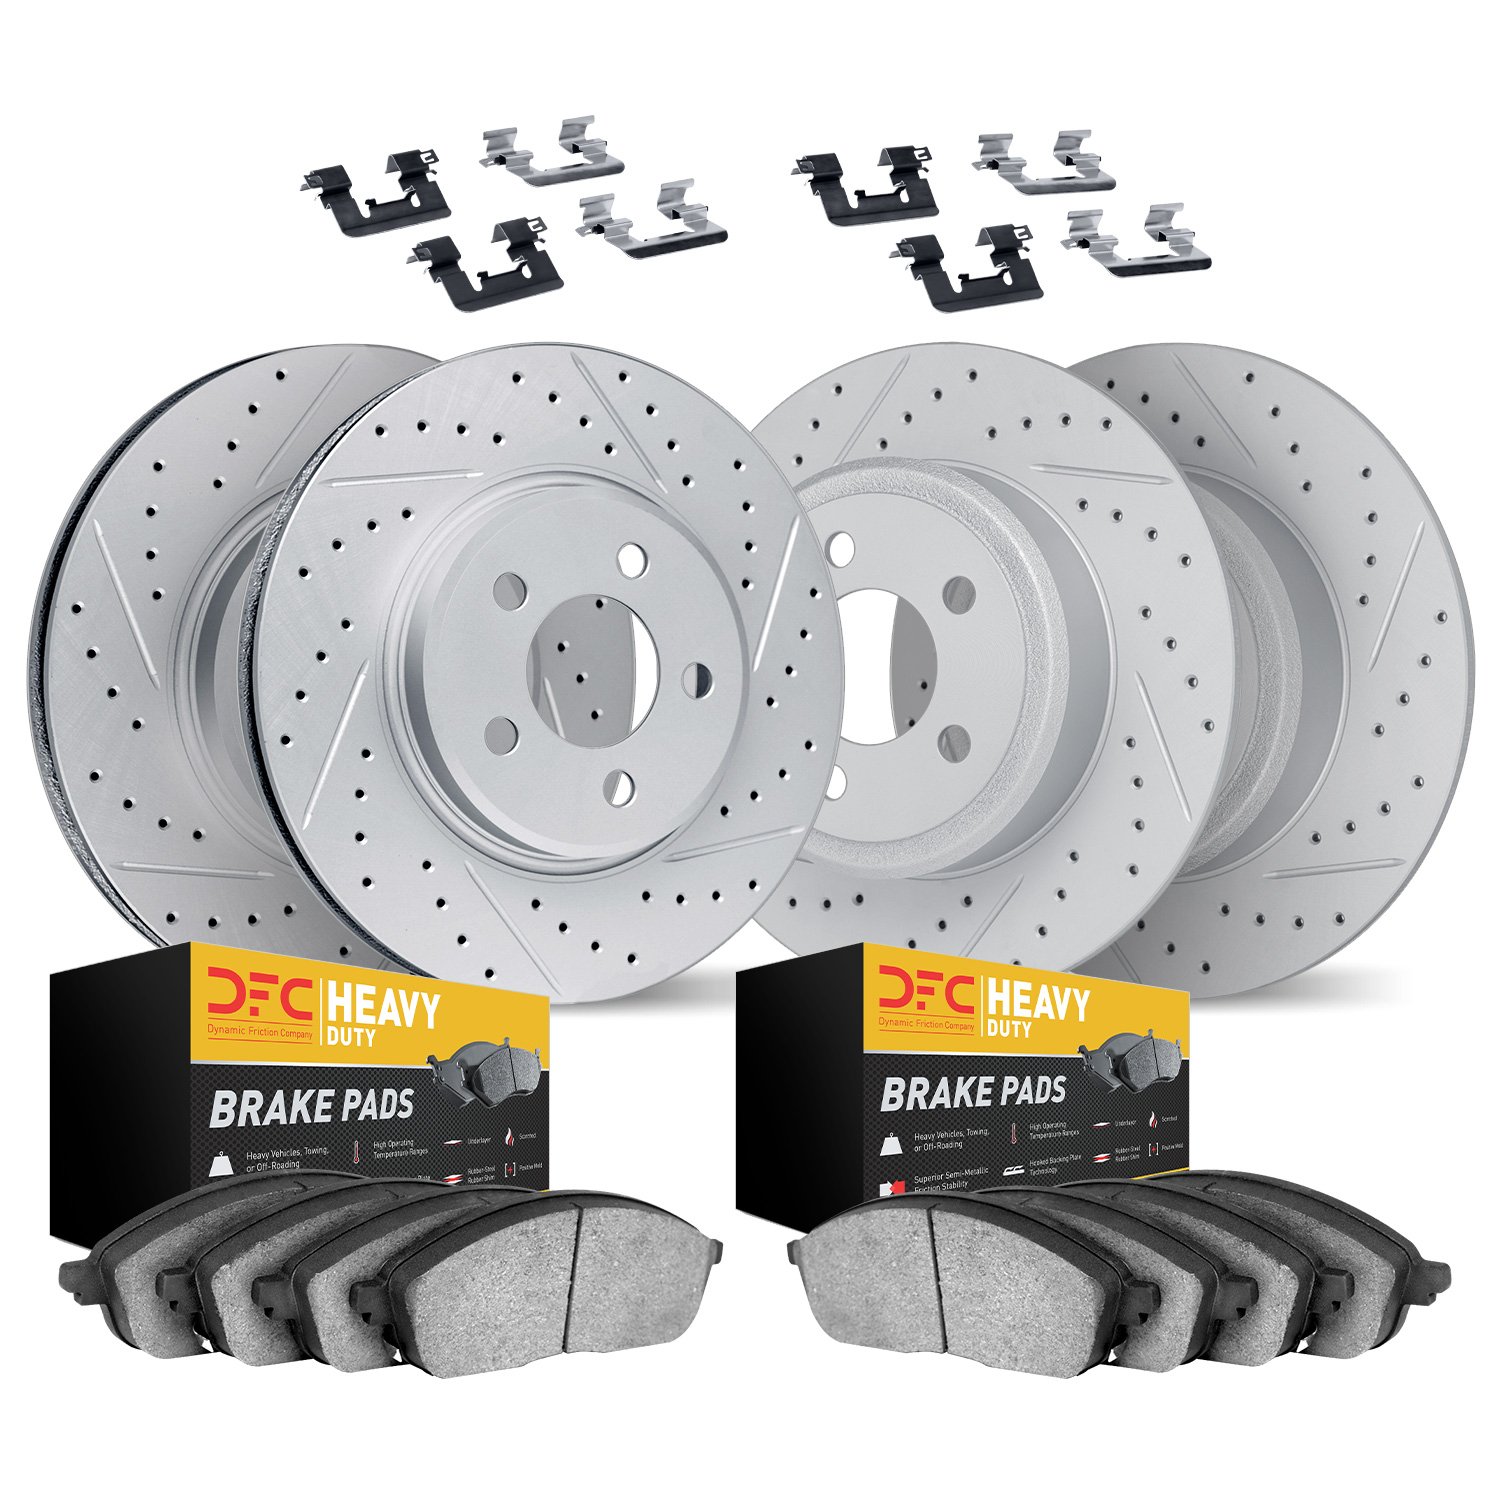 2214-99039 Geoperformance Drilled/Slotted Rotors w/Heavy-Duty Pads Kit & Hardware, 2001-2002 Ford/Lincoln/Mercury/Mazda, Positio